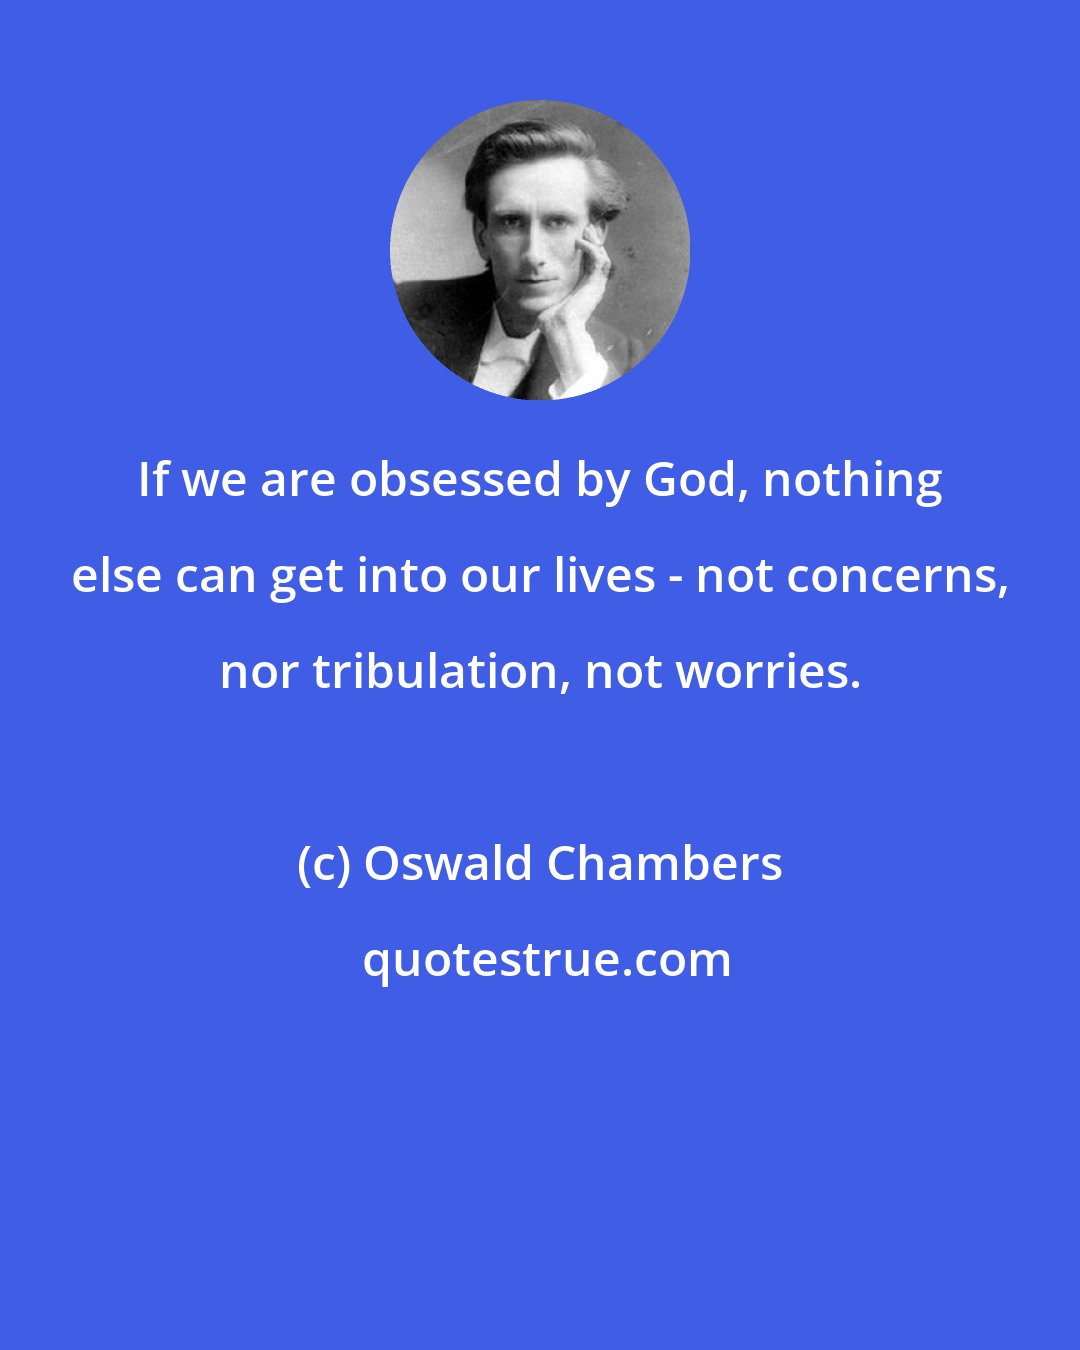 Oswald Chambers: If we are obsessed by God, nothing else can get into our lives - not concerns, nor tribulation, not worries.